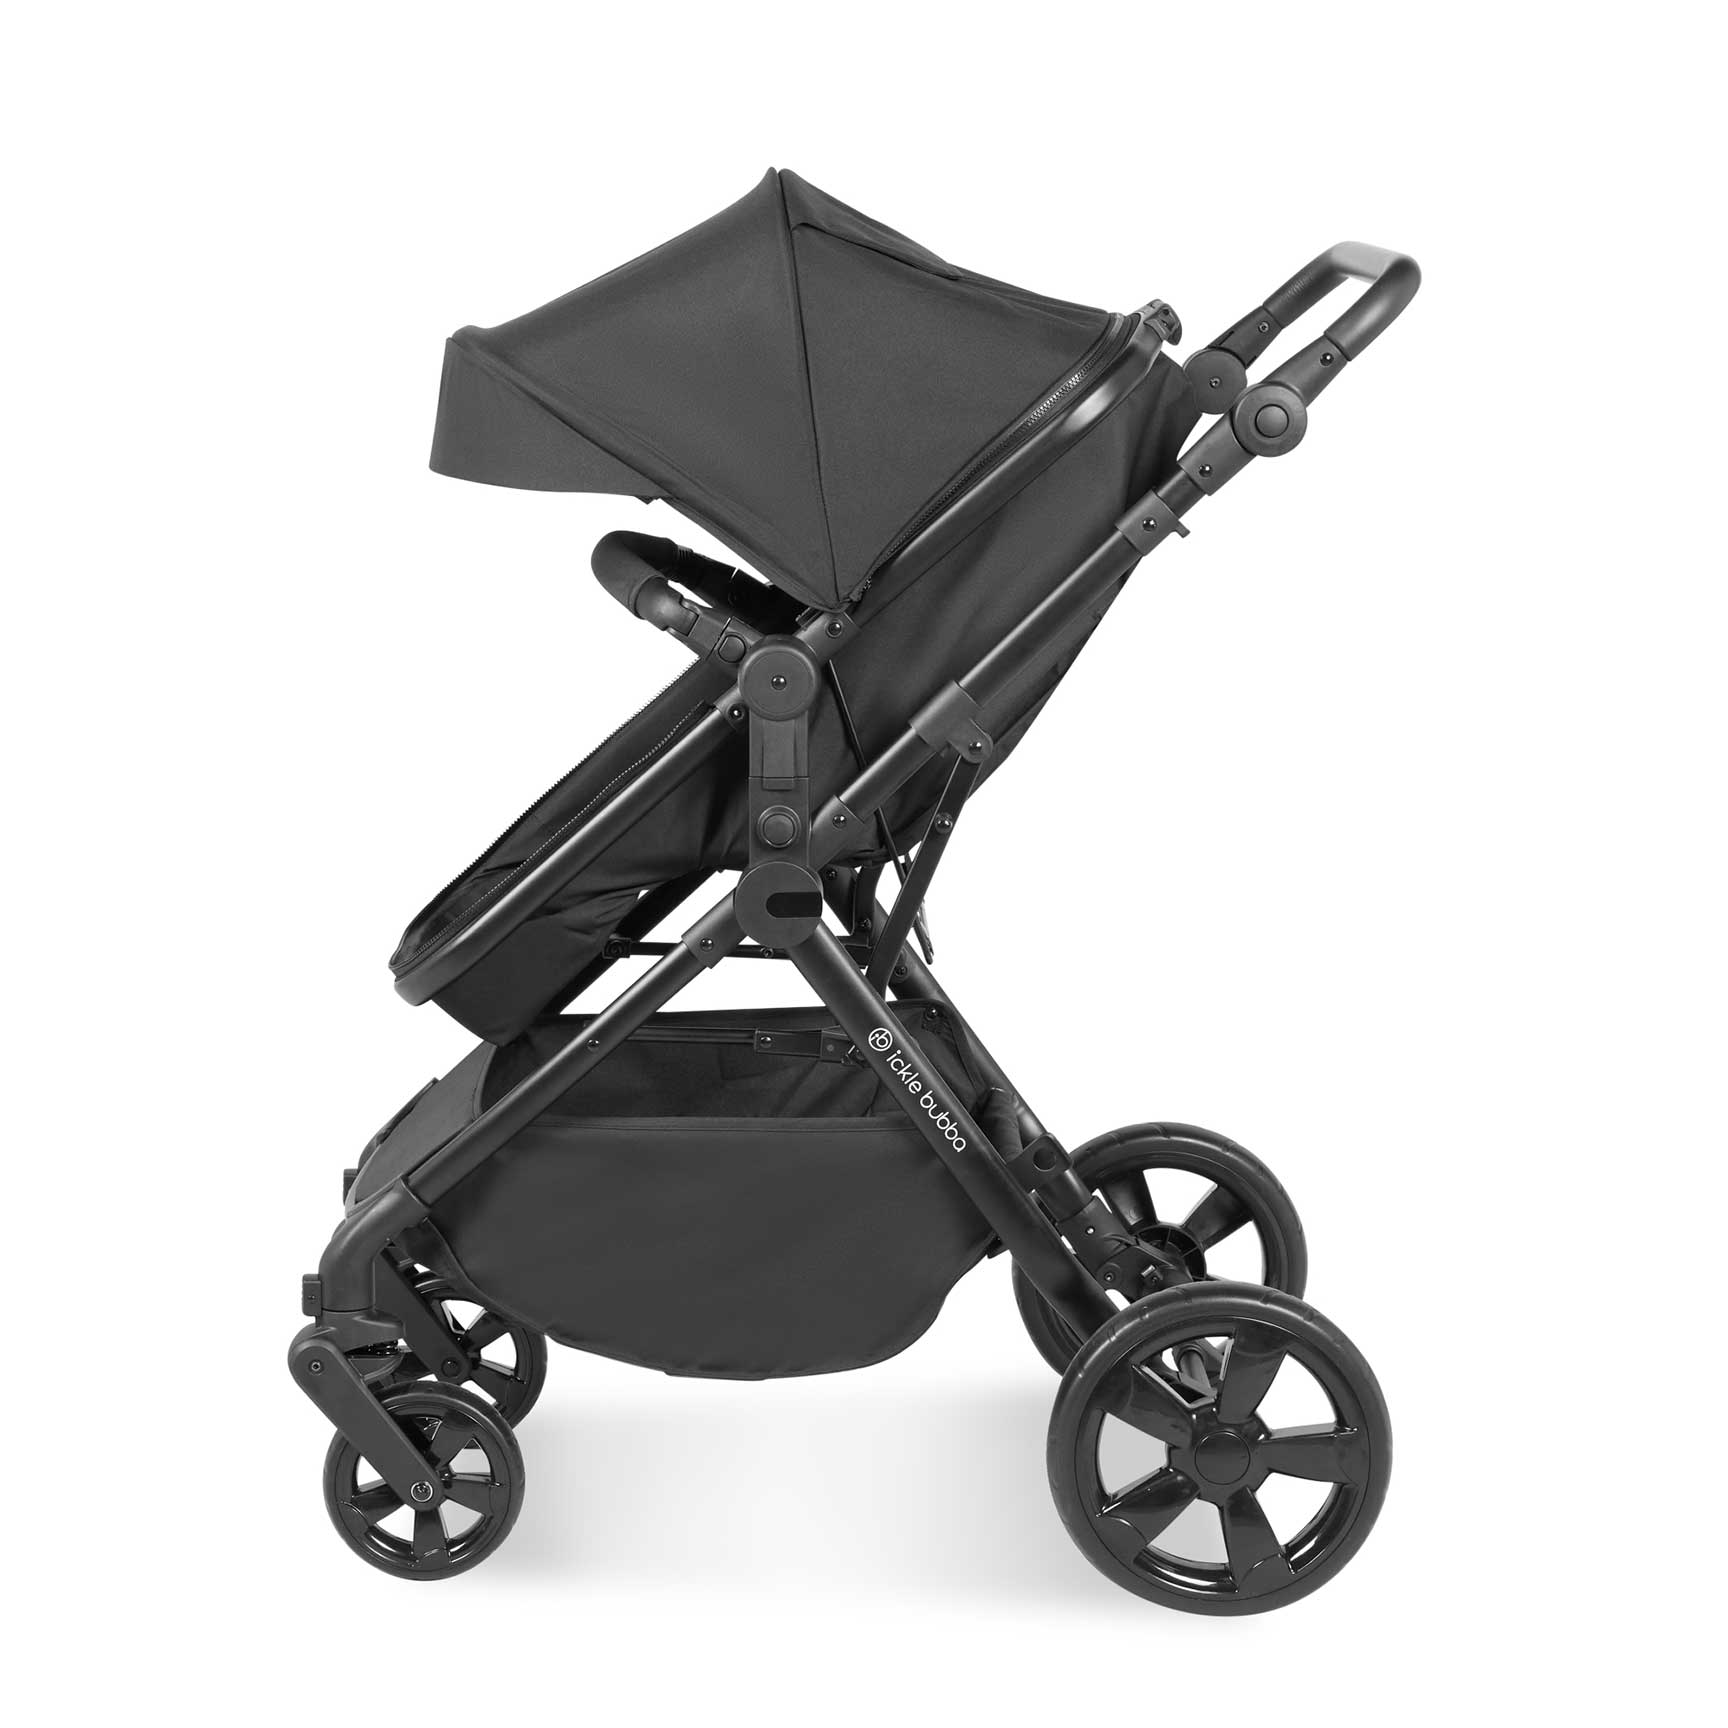 Ickle Bubba baby prams Ickle Bubba Comet All-in-One I-Size Travel System with Isofix Base - Black 10-008-300-002